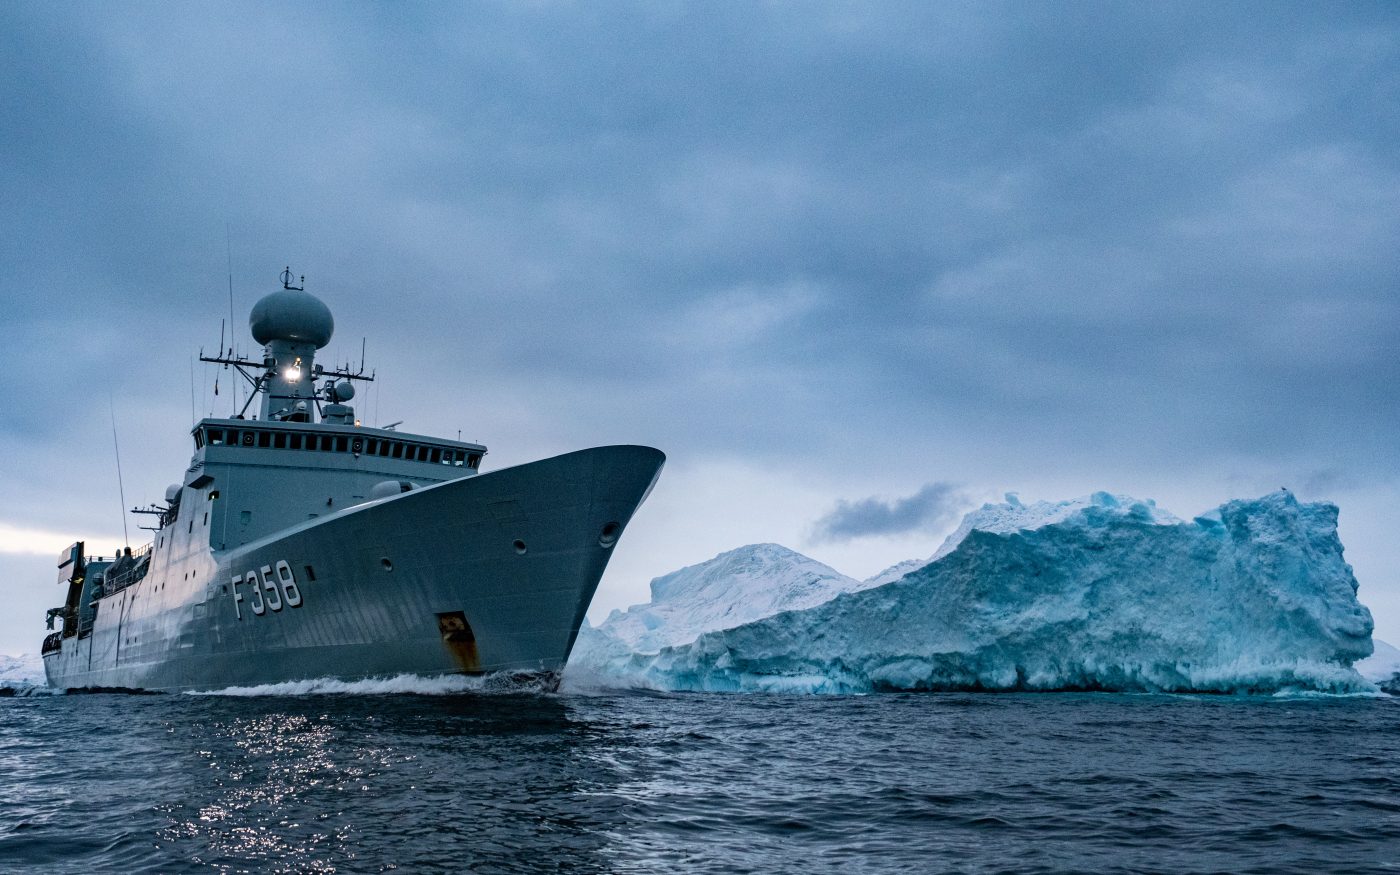 Photo: The Royal Danish Navy frigate HDMS Triton passes an iceberg in the waters around Greenland. The Royal Danish Navy frigate HDMS Triton is part of the Joint Arctic Command Denmark., Credit: NATO via Flickr. https://flic.kr/p/2ojtpyS